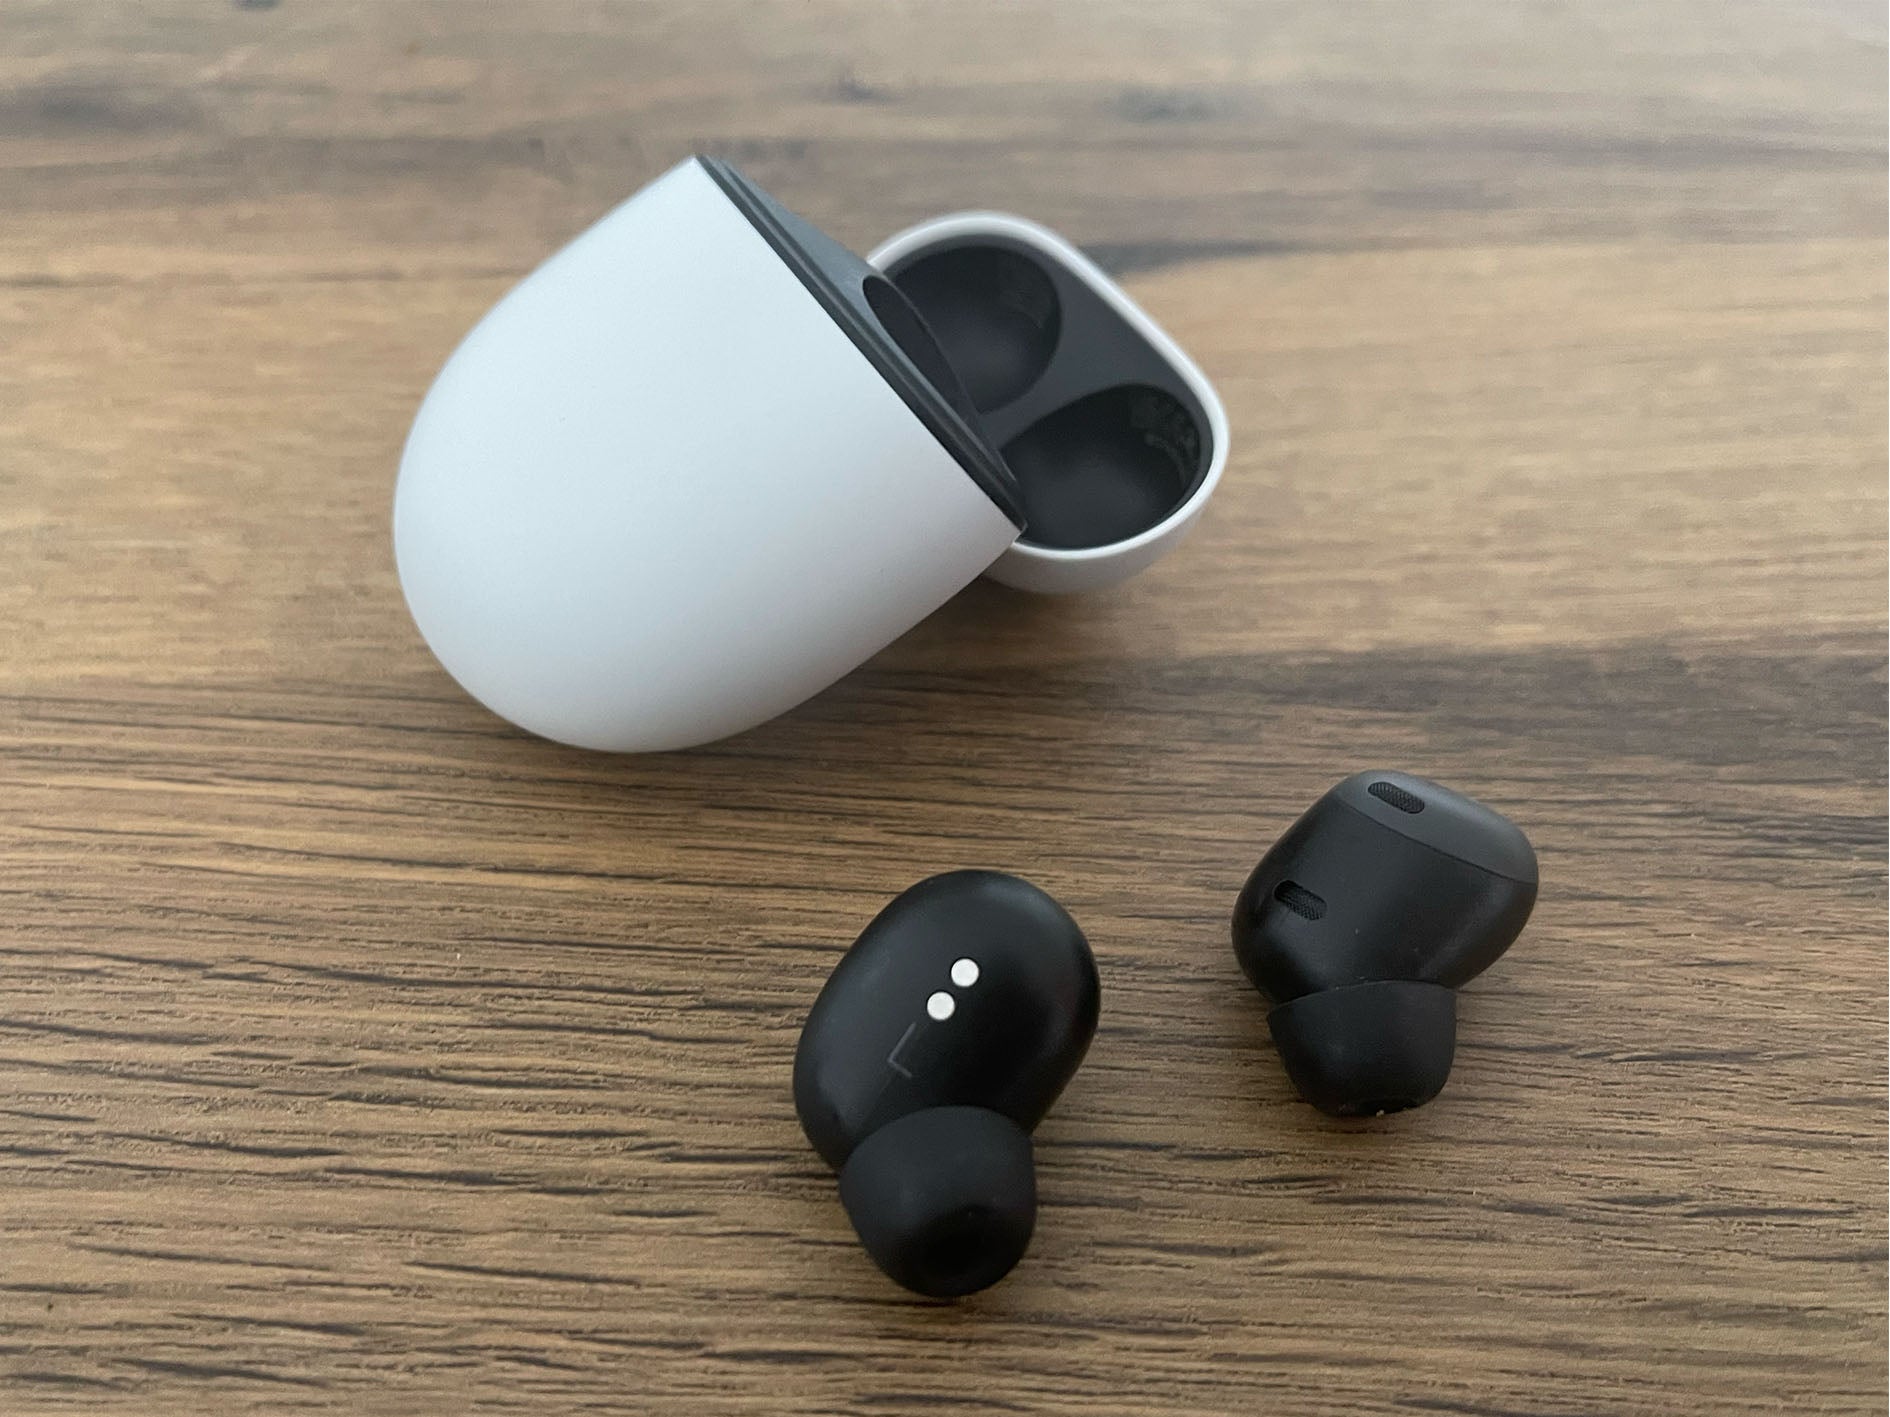 Google Pixel buds pro review: At long last, AirPods pro for 